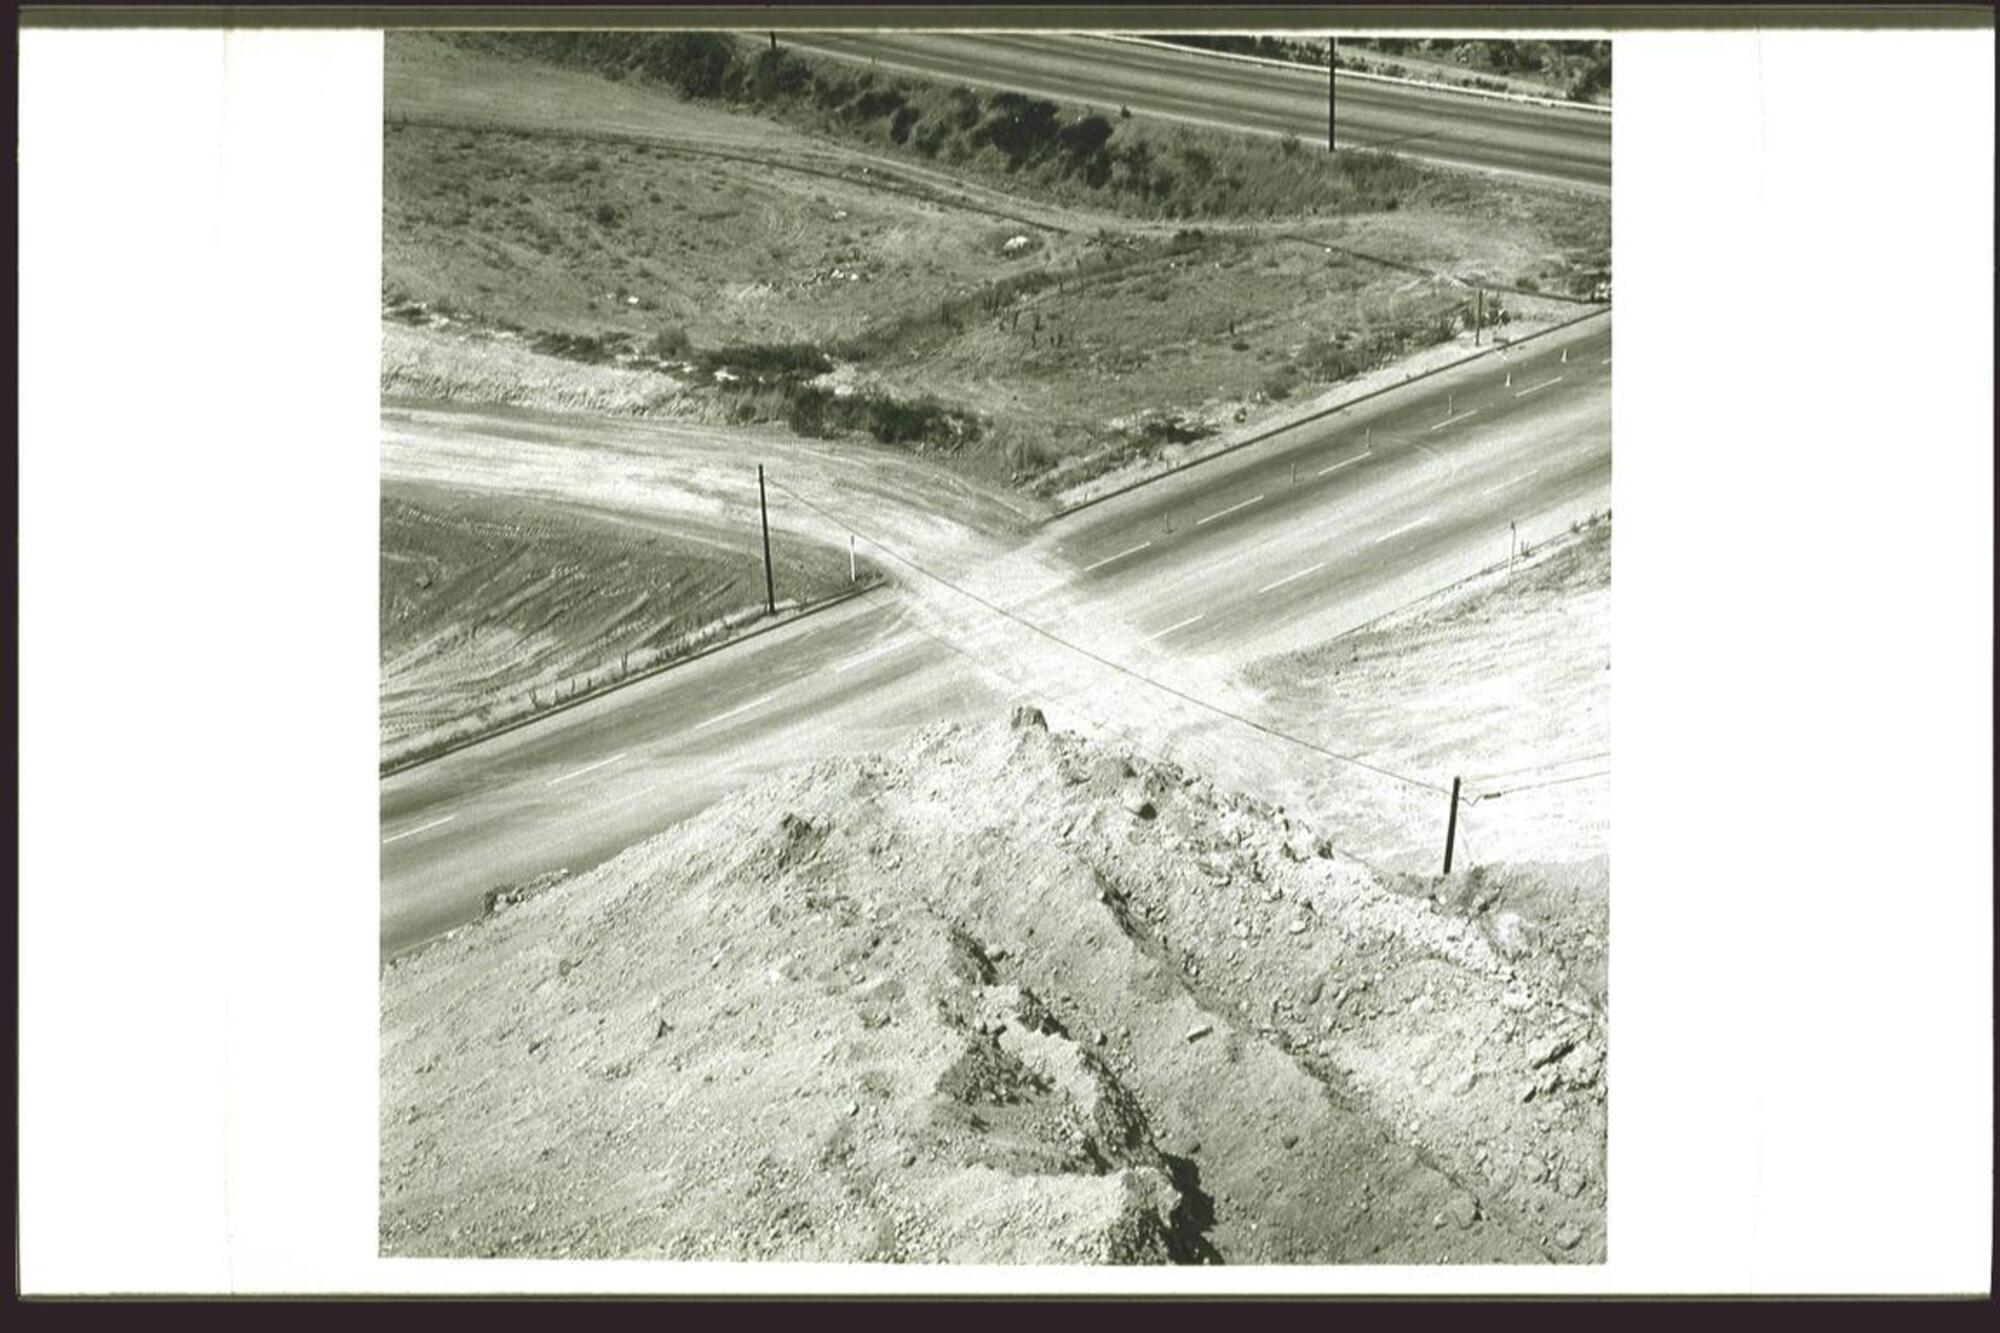 This is a black and white photograph of some roads seen from above, as if the viewer is standing on a nearby hillside. In the foreground, at the viewer's feet, is rocky, dusty soil. Below, the main road runs diagonally across the work and a smaller dirt road crosses it, leaving traces of dirt tracks to the other side of the road. The land is barren with very little vegetation and no vehicles are to be seen.<br />